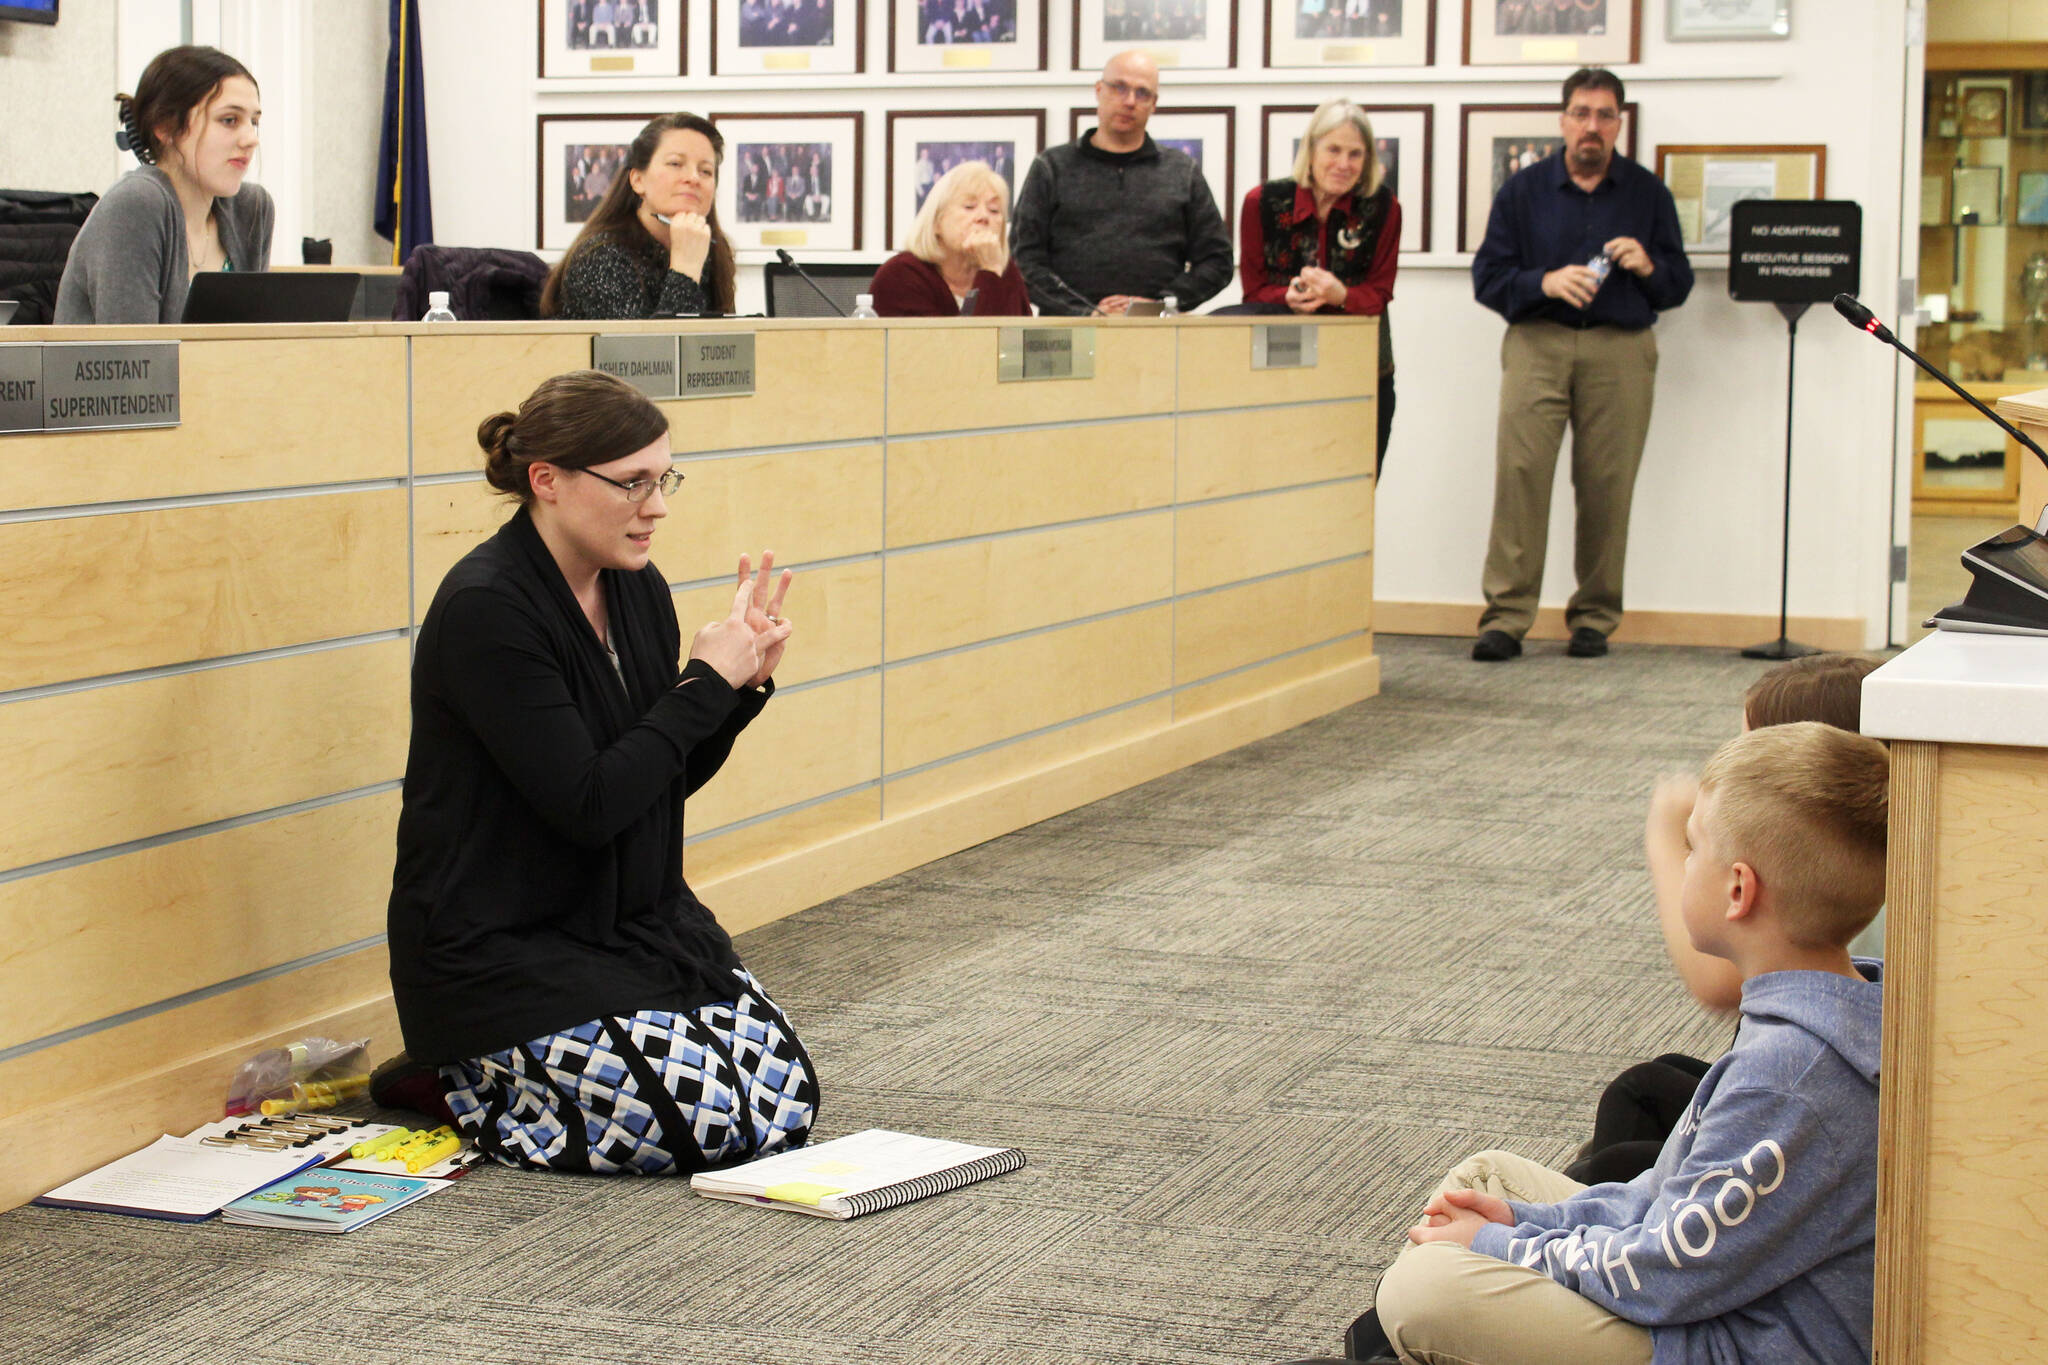 Mountain View Elementary School teacher Kristin Perkins demonstrates with students “phonemic awareness” with practices from Heggerty during a Kenai Peninsula Borough School District Board of Education meeting on Monday, Dec. 5, 2022, in Soldotna, Alaska. (Ashlyn O’Hara/Peninsula Clarion)